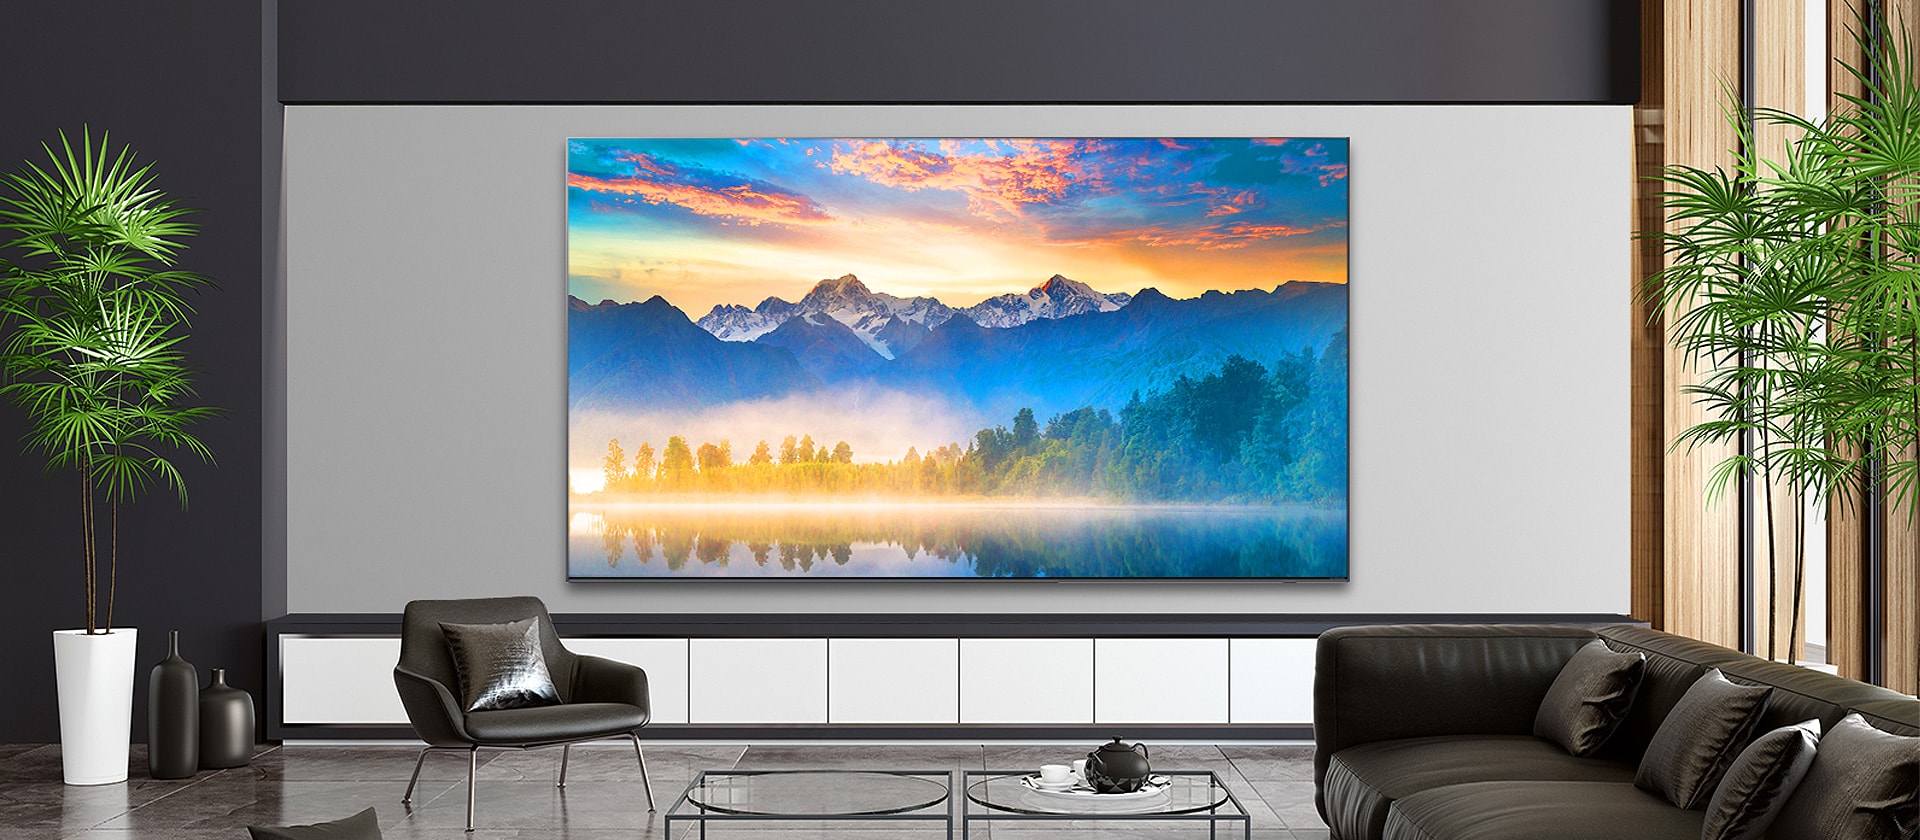 A living room with a wall-mounted TV screen showing a natural scene.